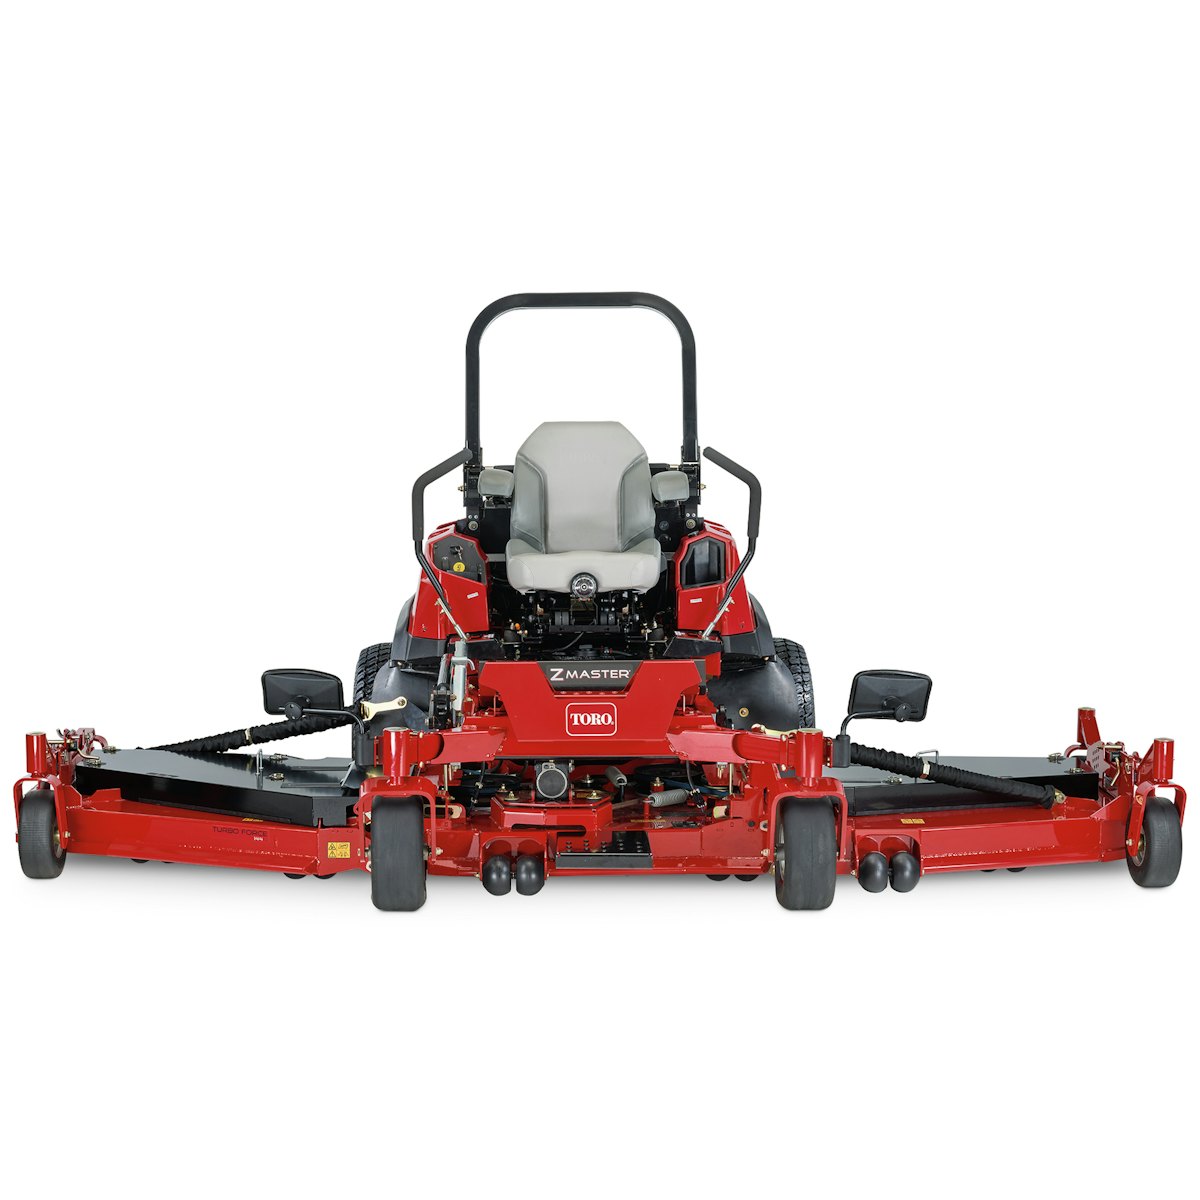 Toro introduces new equipment at GIE + EXPO | Total Landscape Care